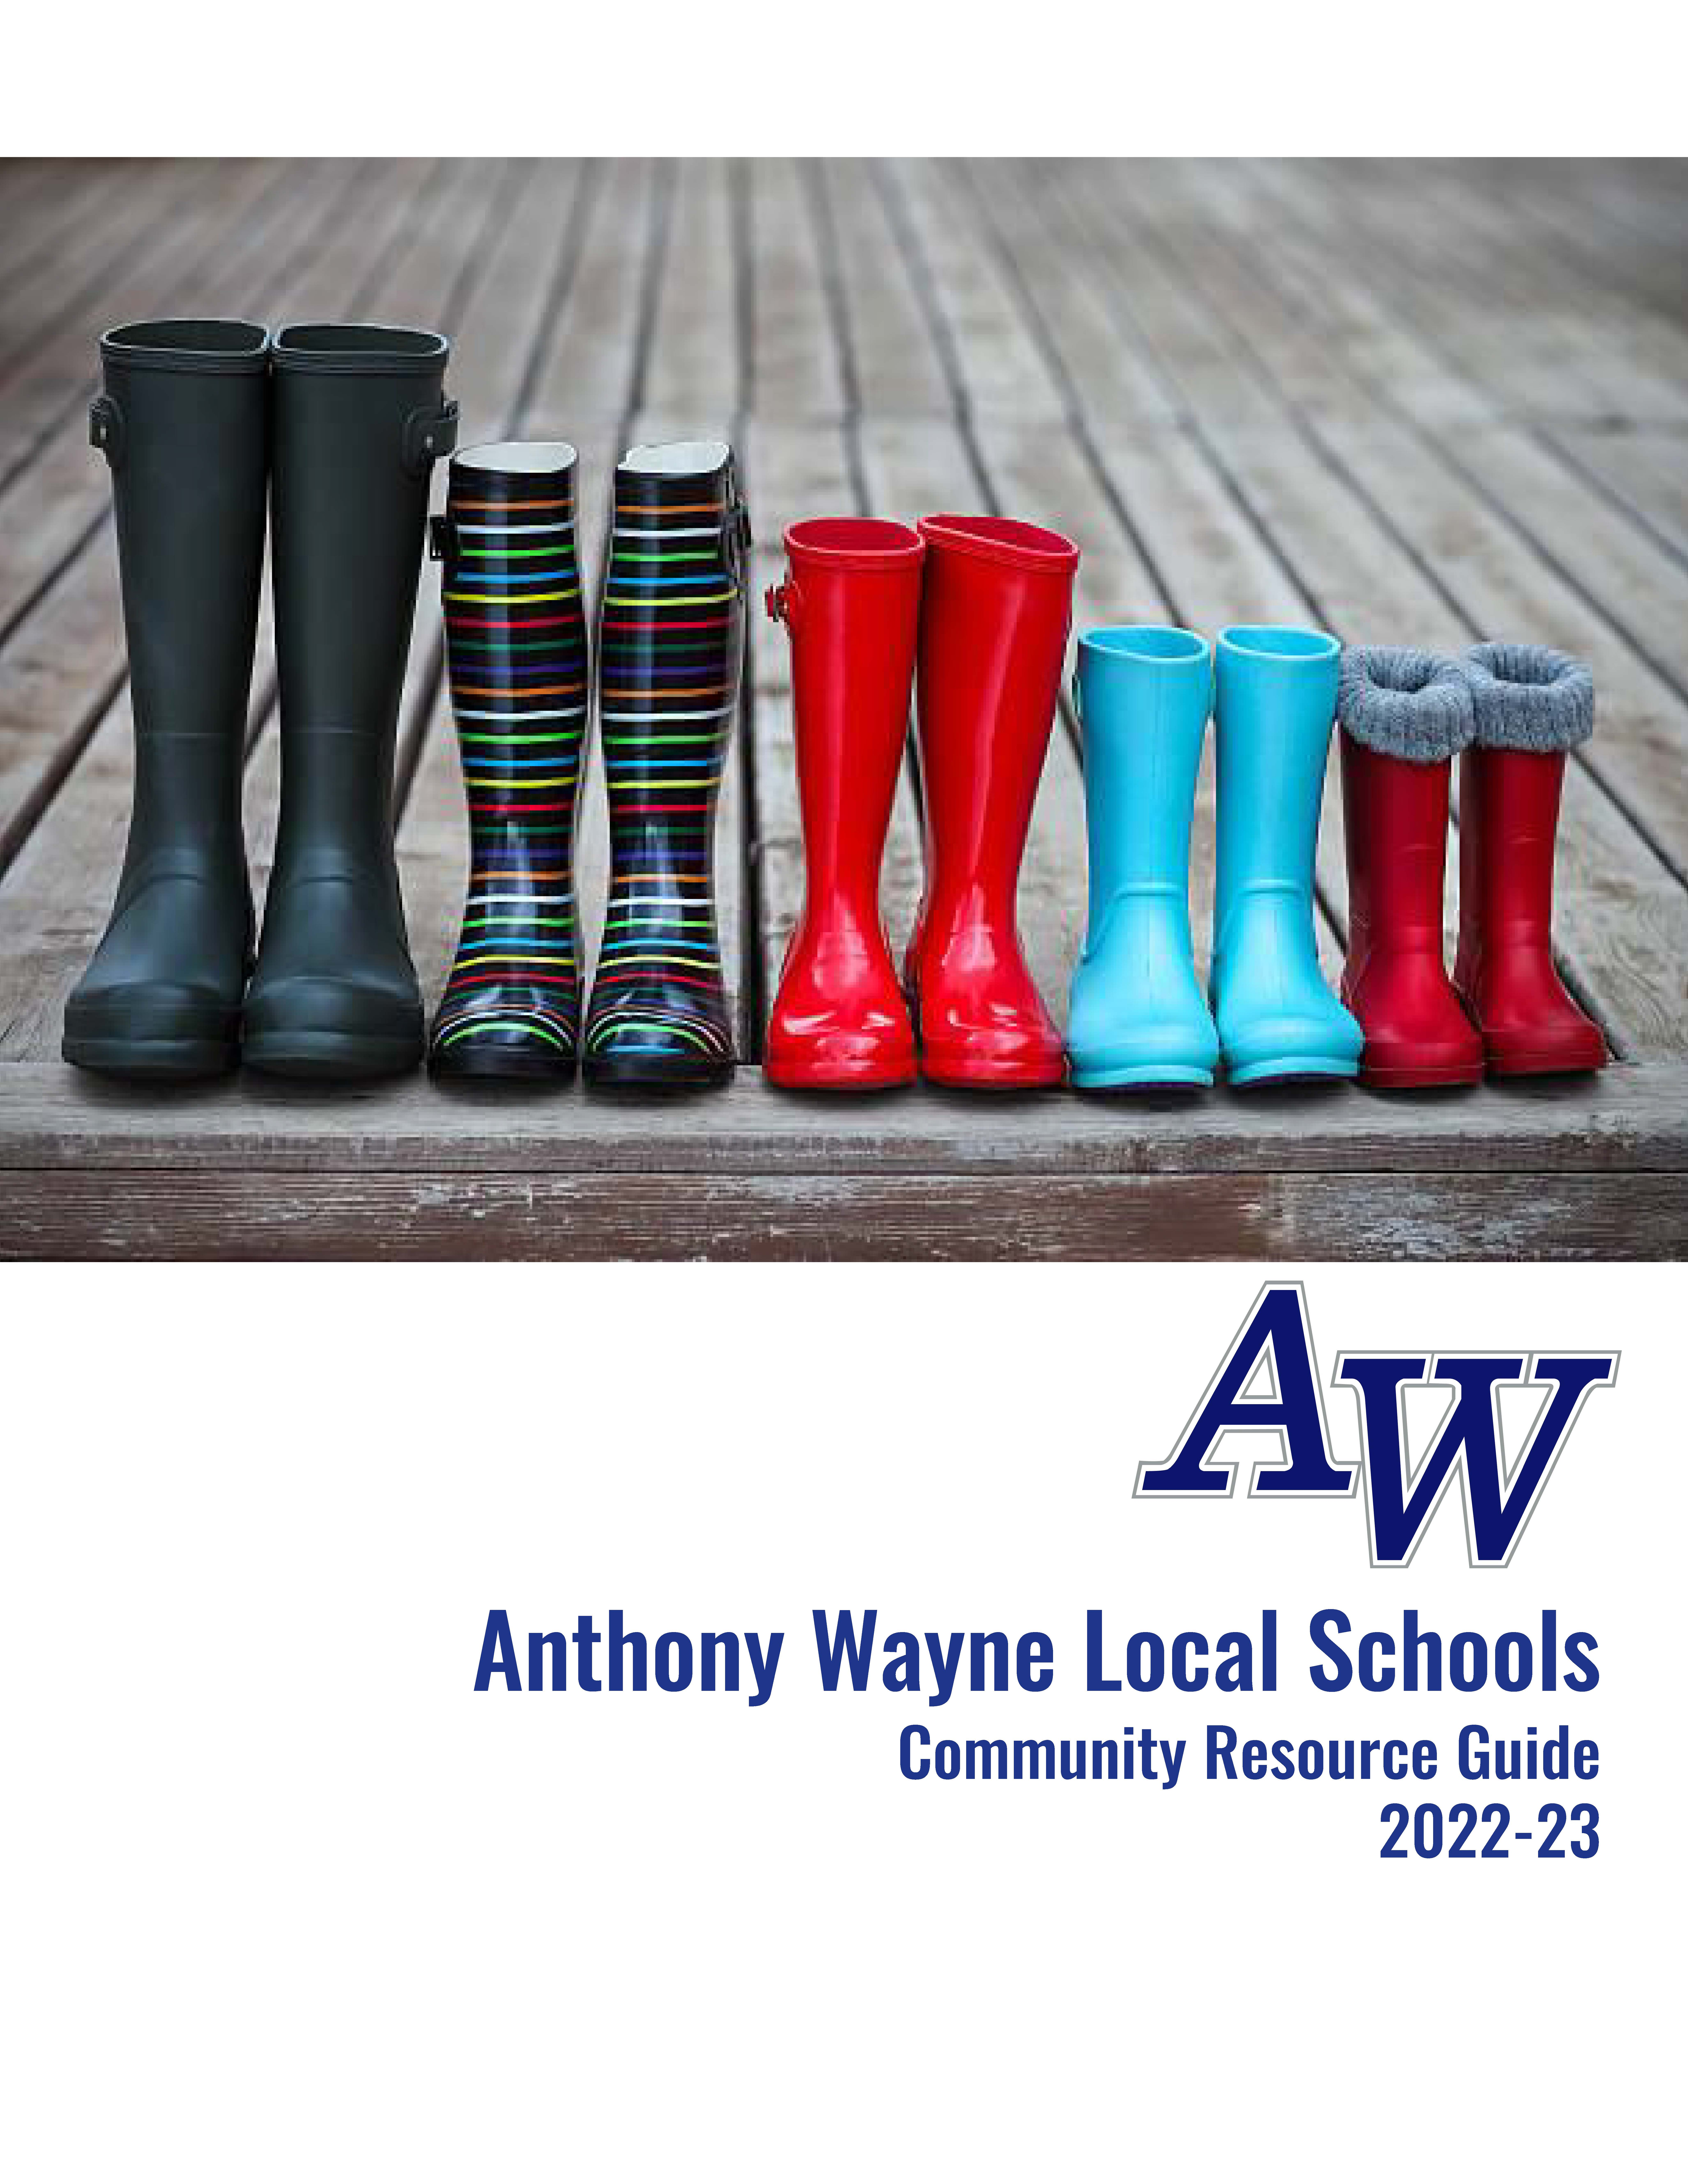 awls community resource guide